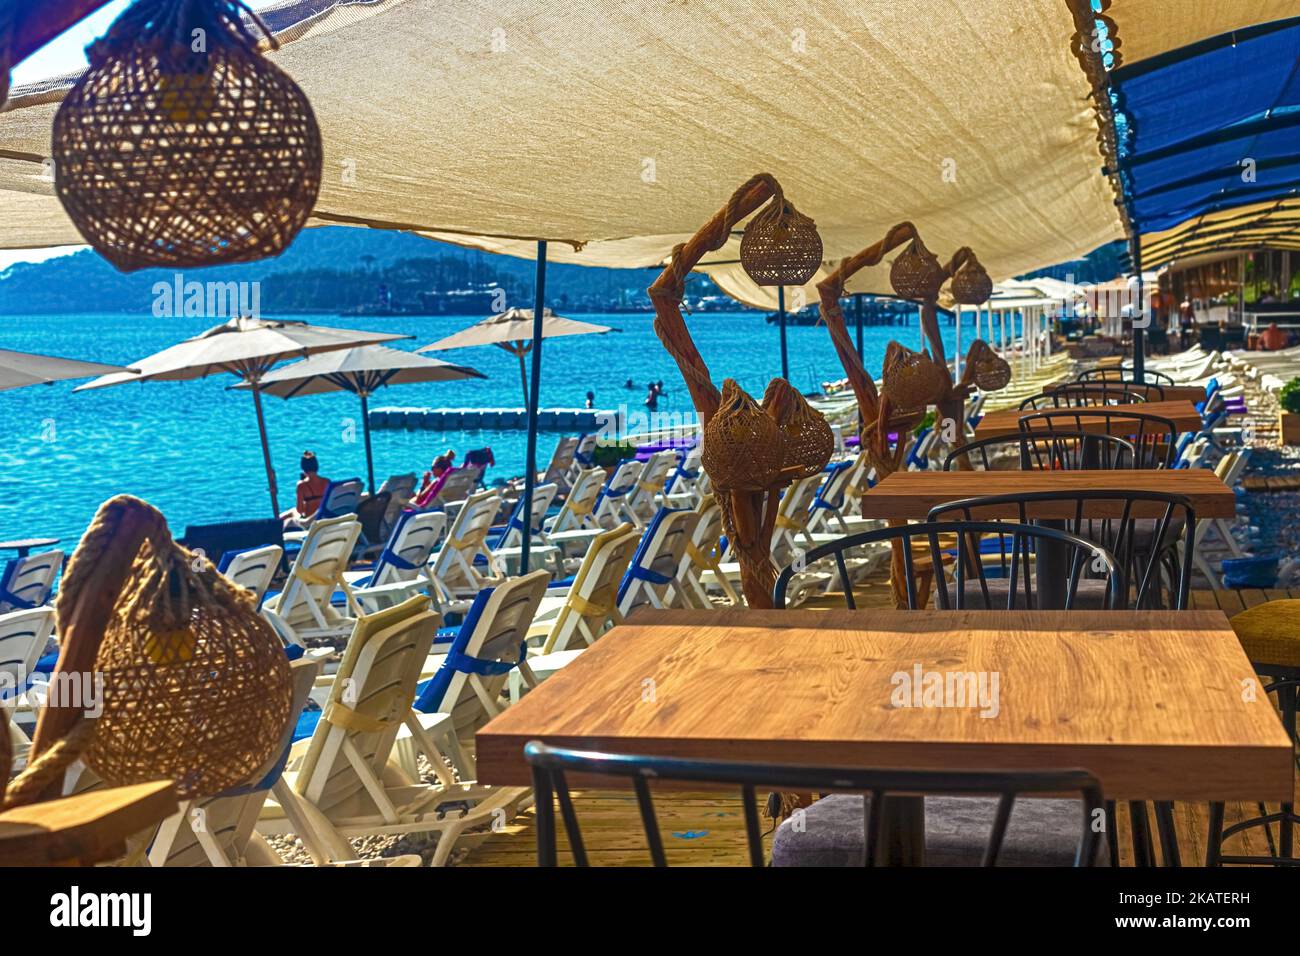 View of the cafe area on the beach. Kemer, Turkey Stock Photo